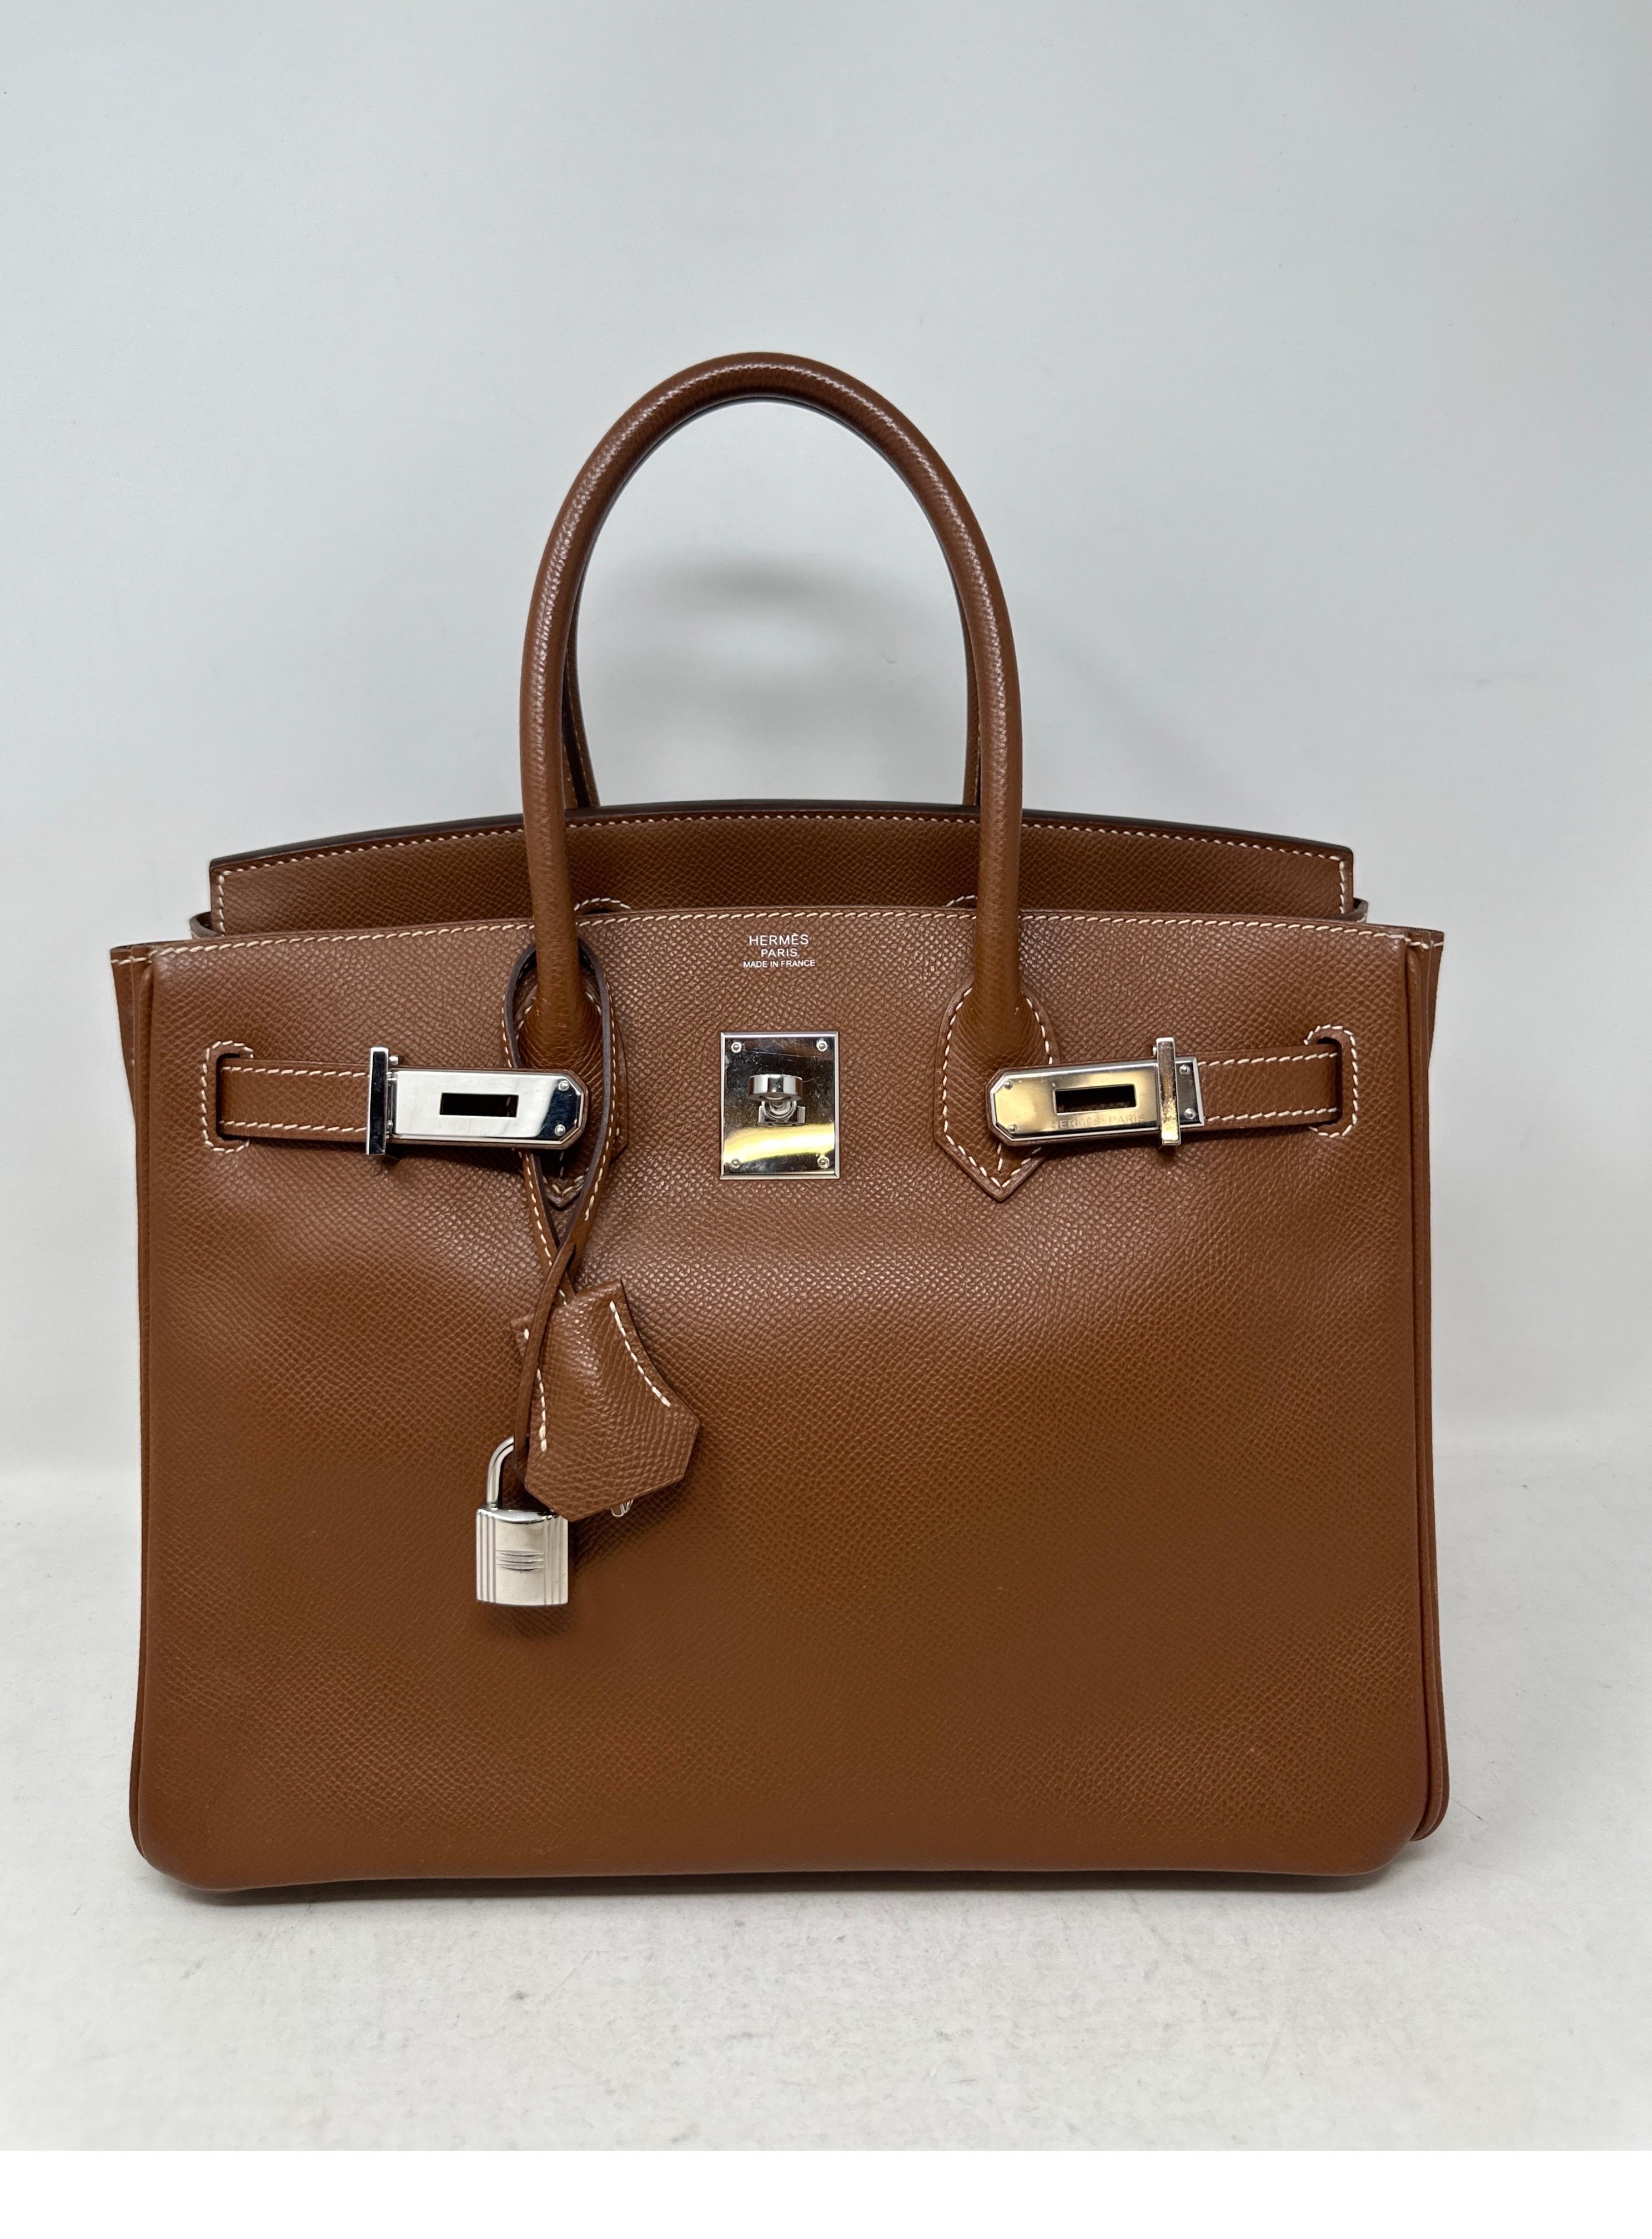 Hermes Gold Birkin 30 Bag. Epsom leather. Palladium silver hardware. Very good condition. Classic color and size. Neutral will go with everything. Interior clean. Includes clochette, lock, keys, and dust bag. Guaranteed authentic. 